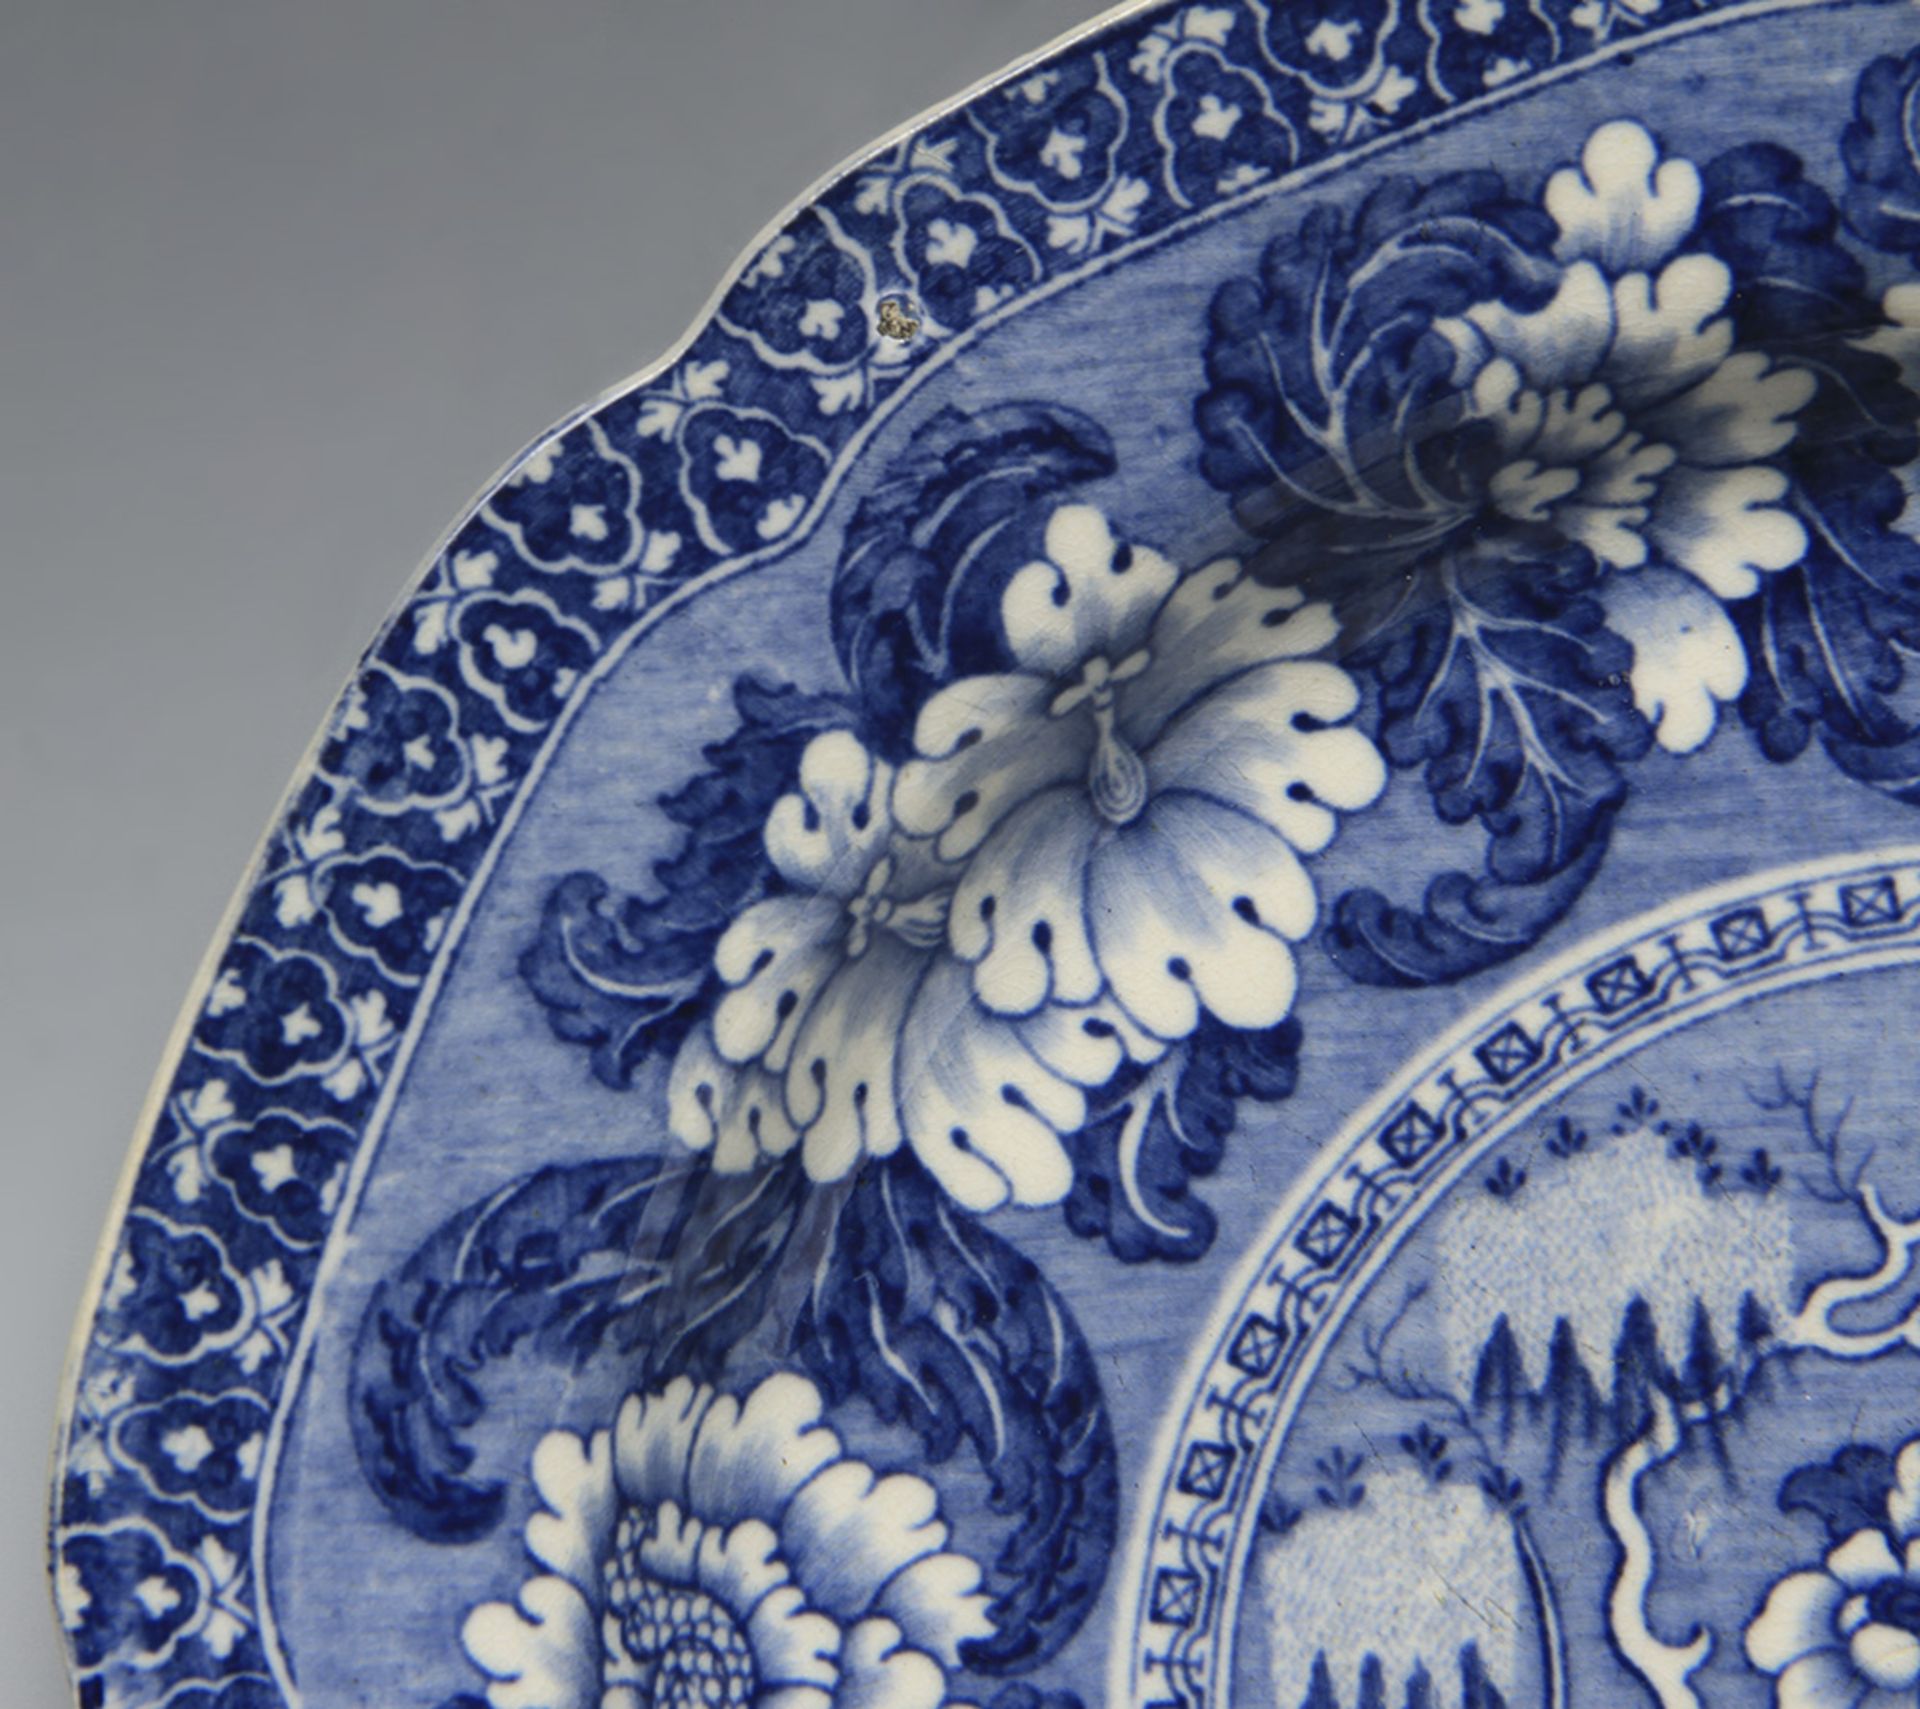 ANTIQUE STAFFORDSHIRE FLORAL SCENE BLUE & WHITE PLATE c.1820 - Image 3 of 10